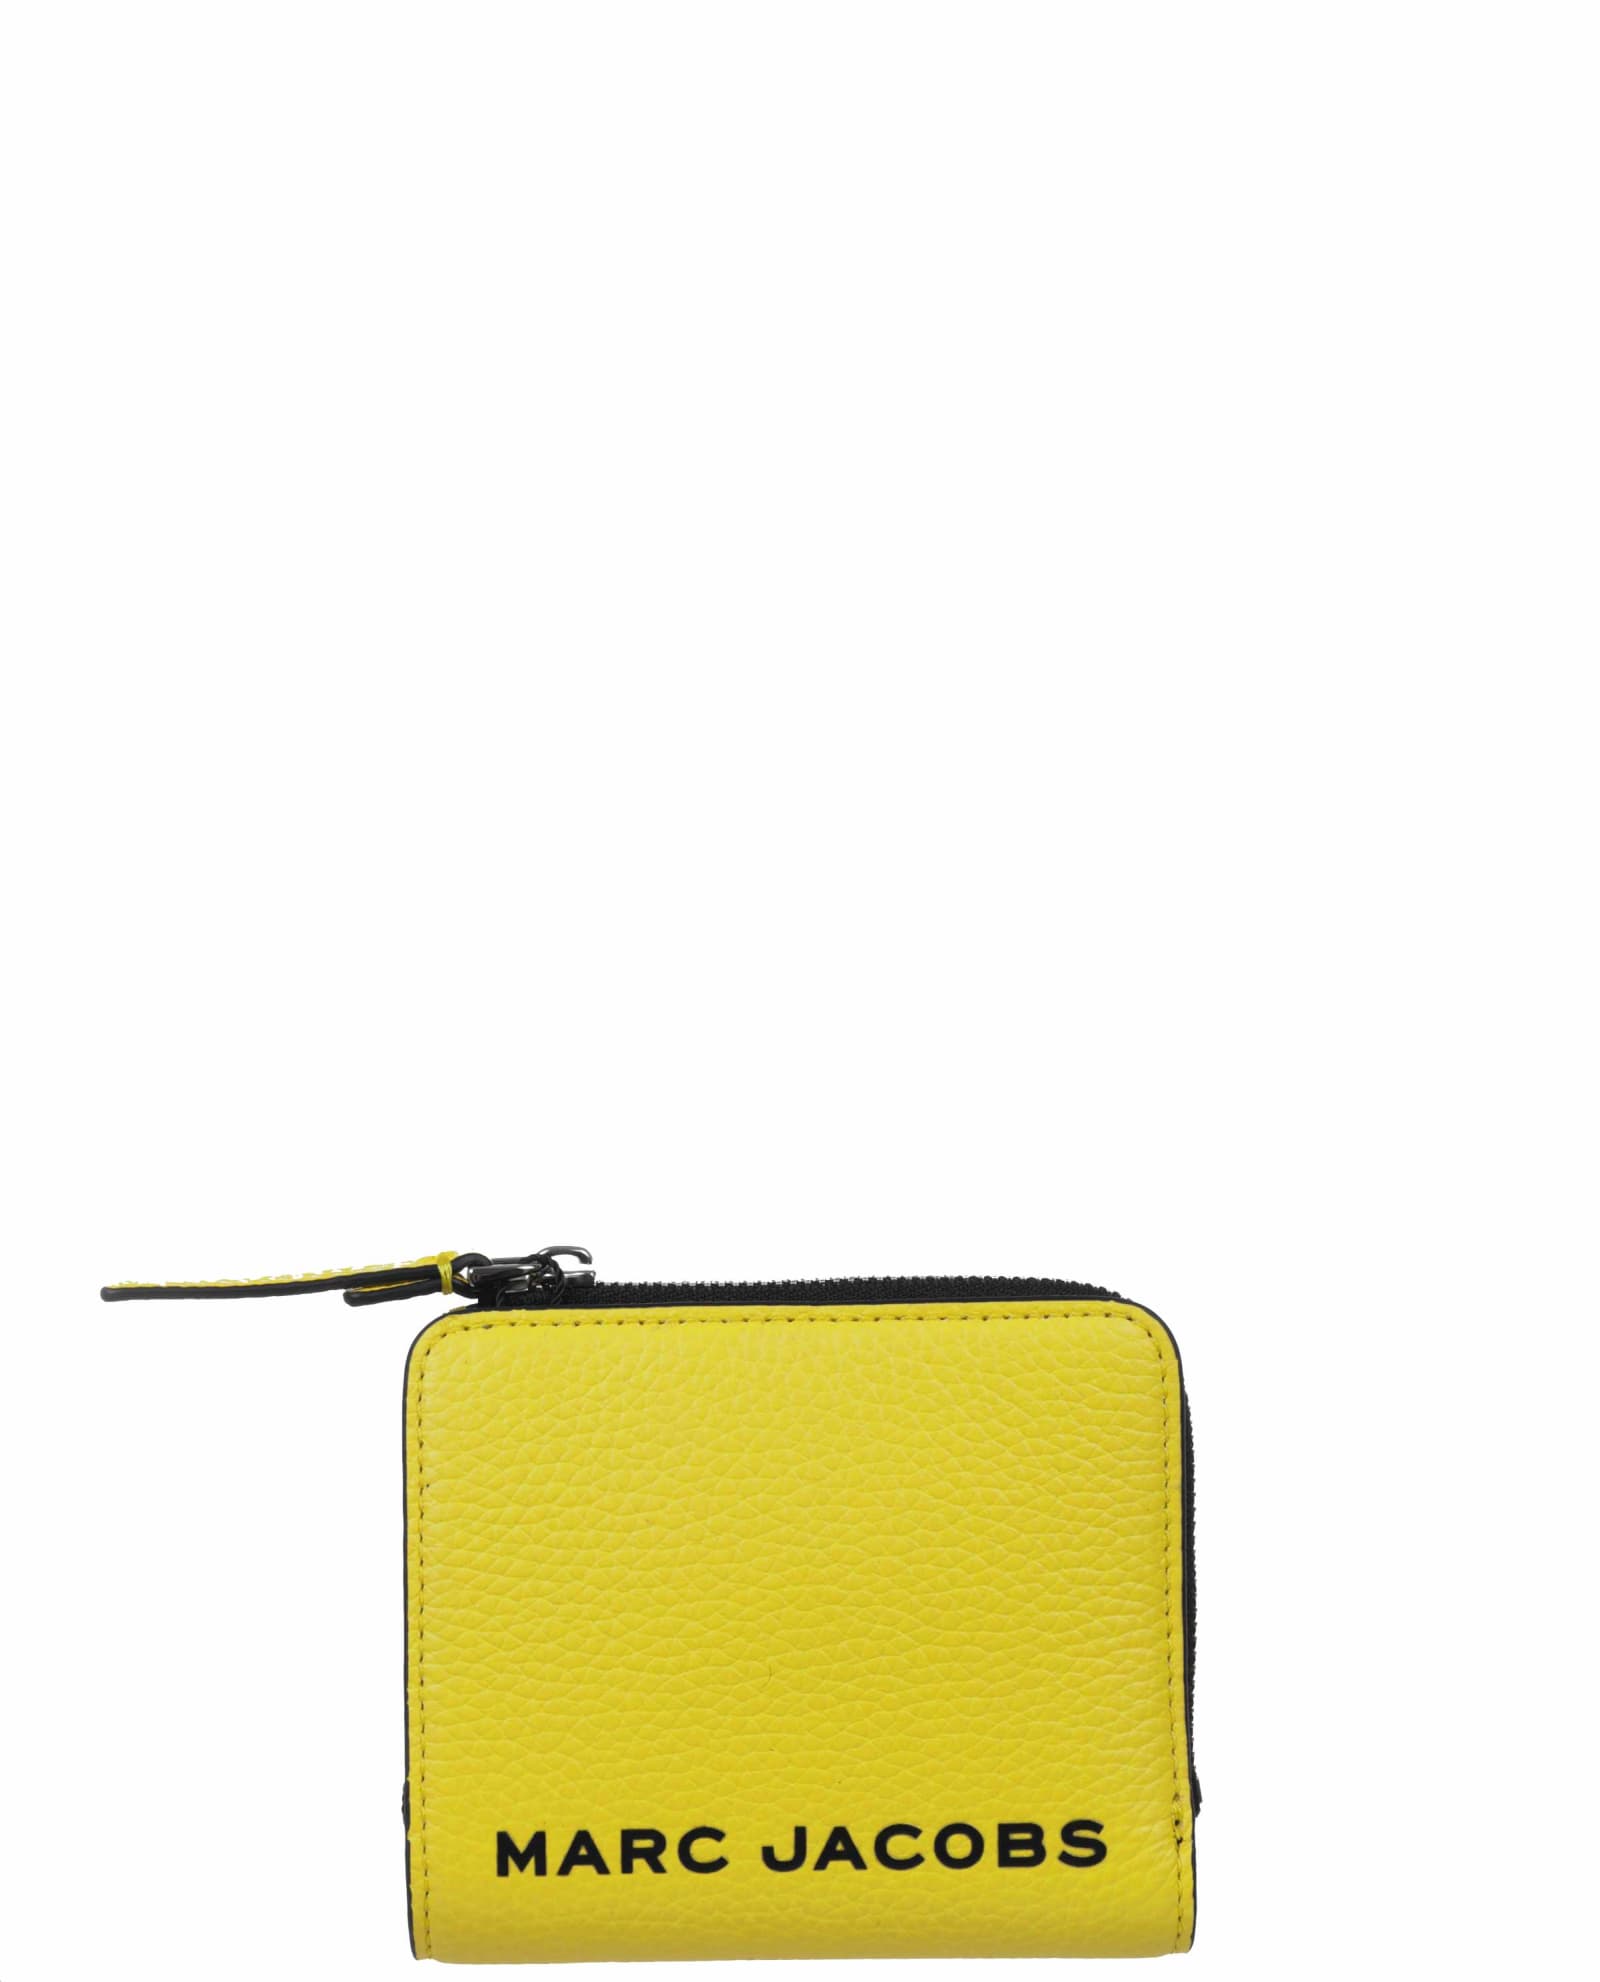 The Marc Jacobs Yellow Compact Wallet Mini